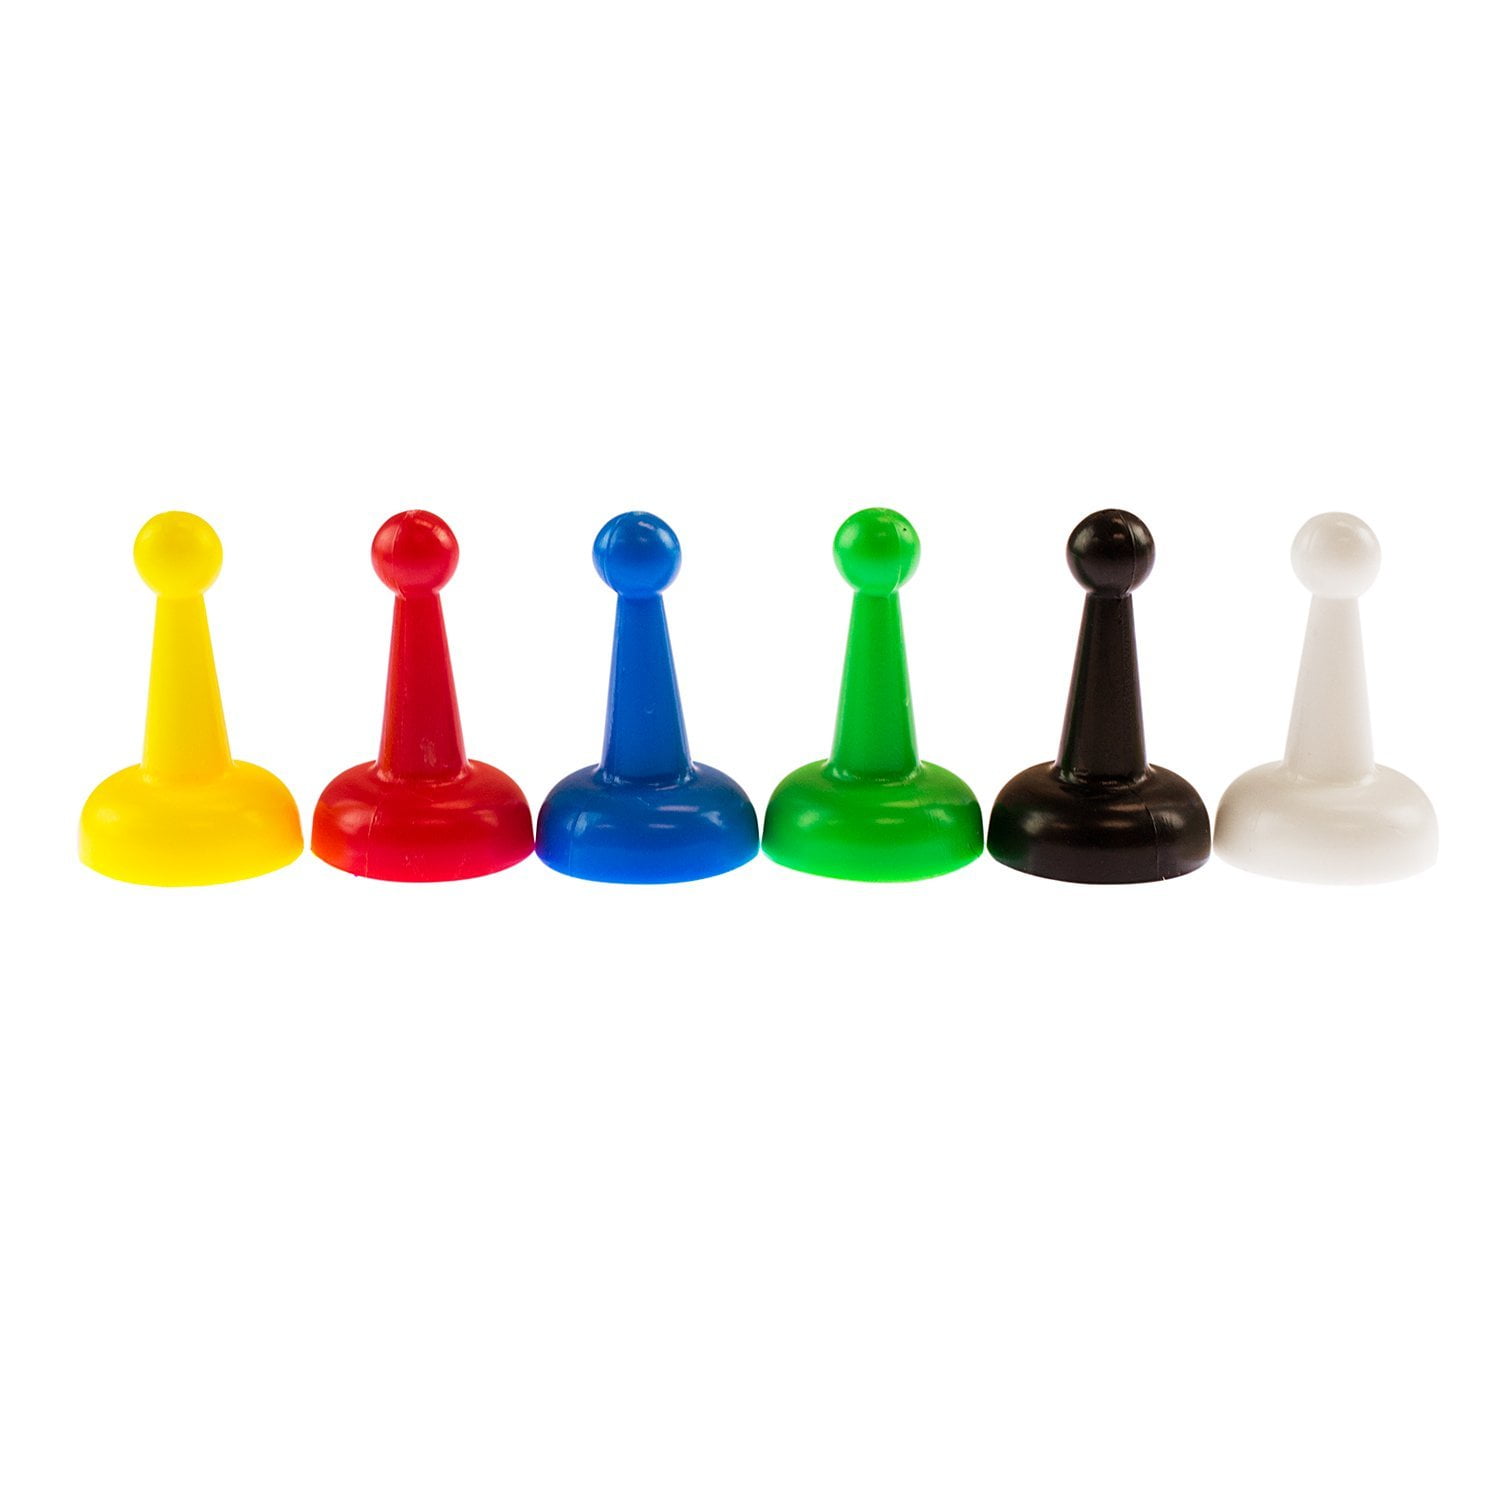 25mm Solid Game Pieces NEW Set of 120 Koplow Standard Board Game Pawns 